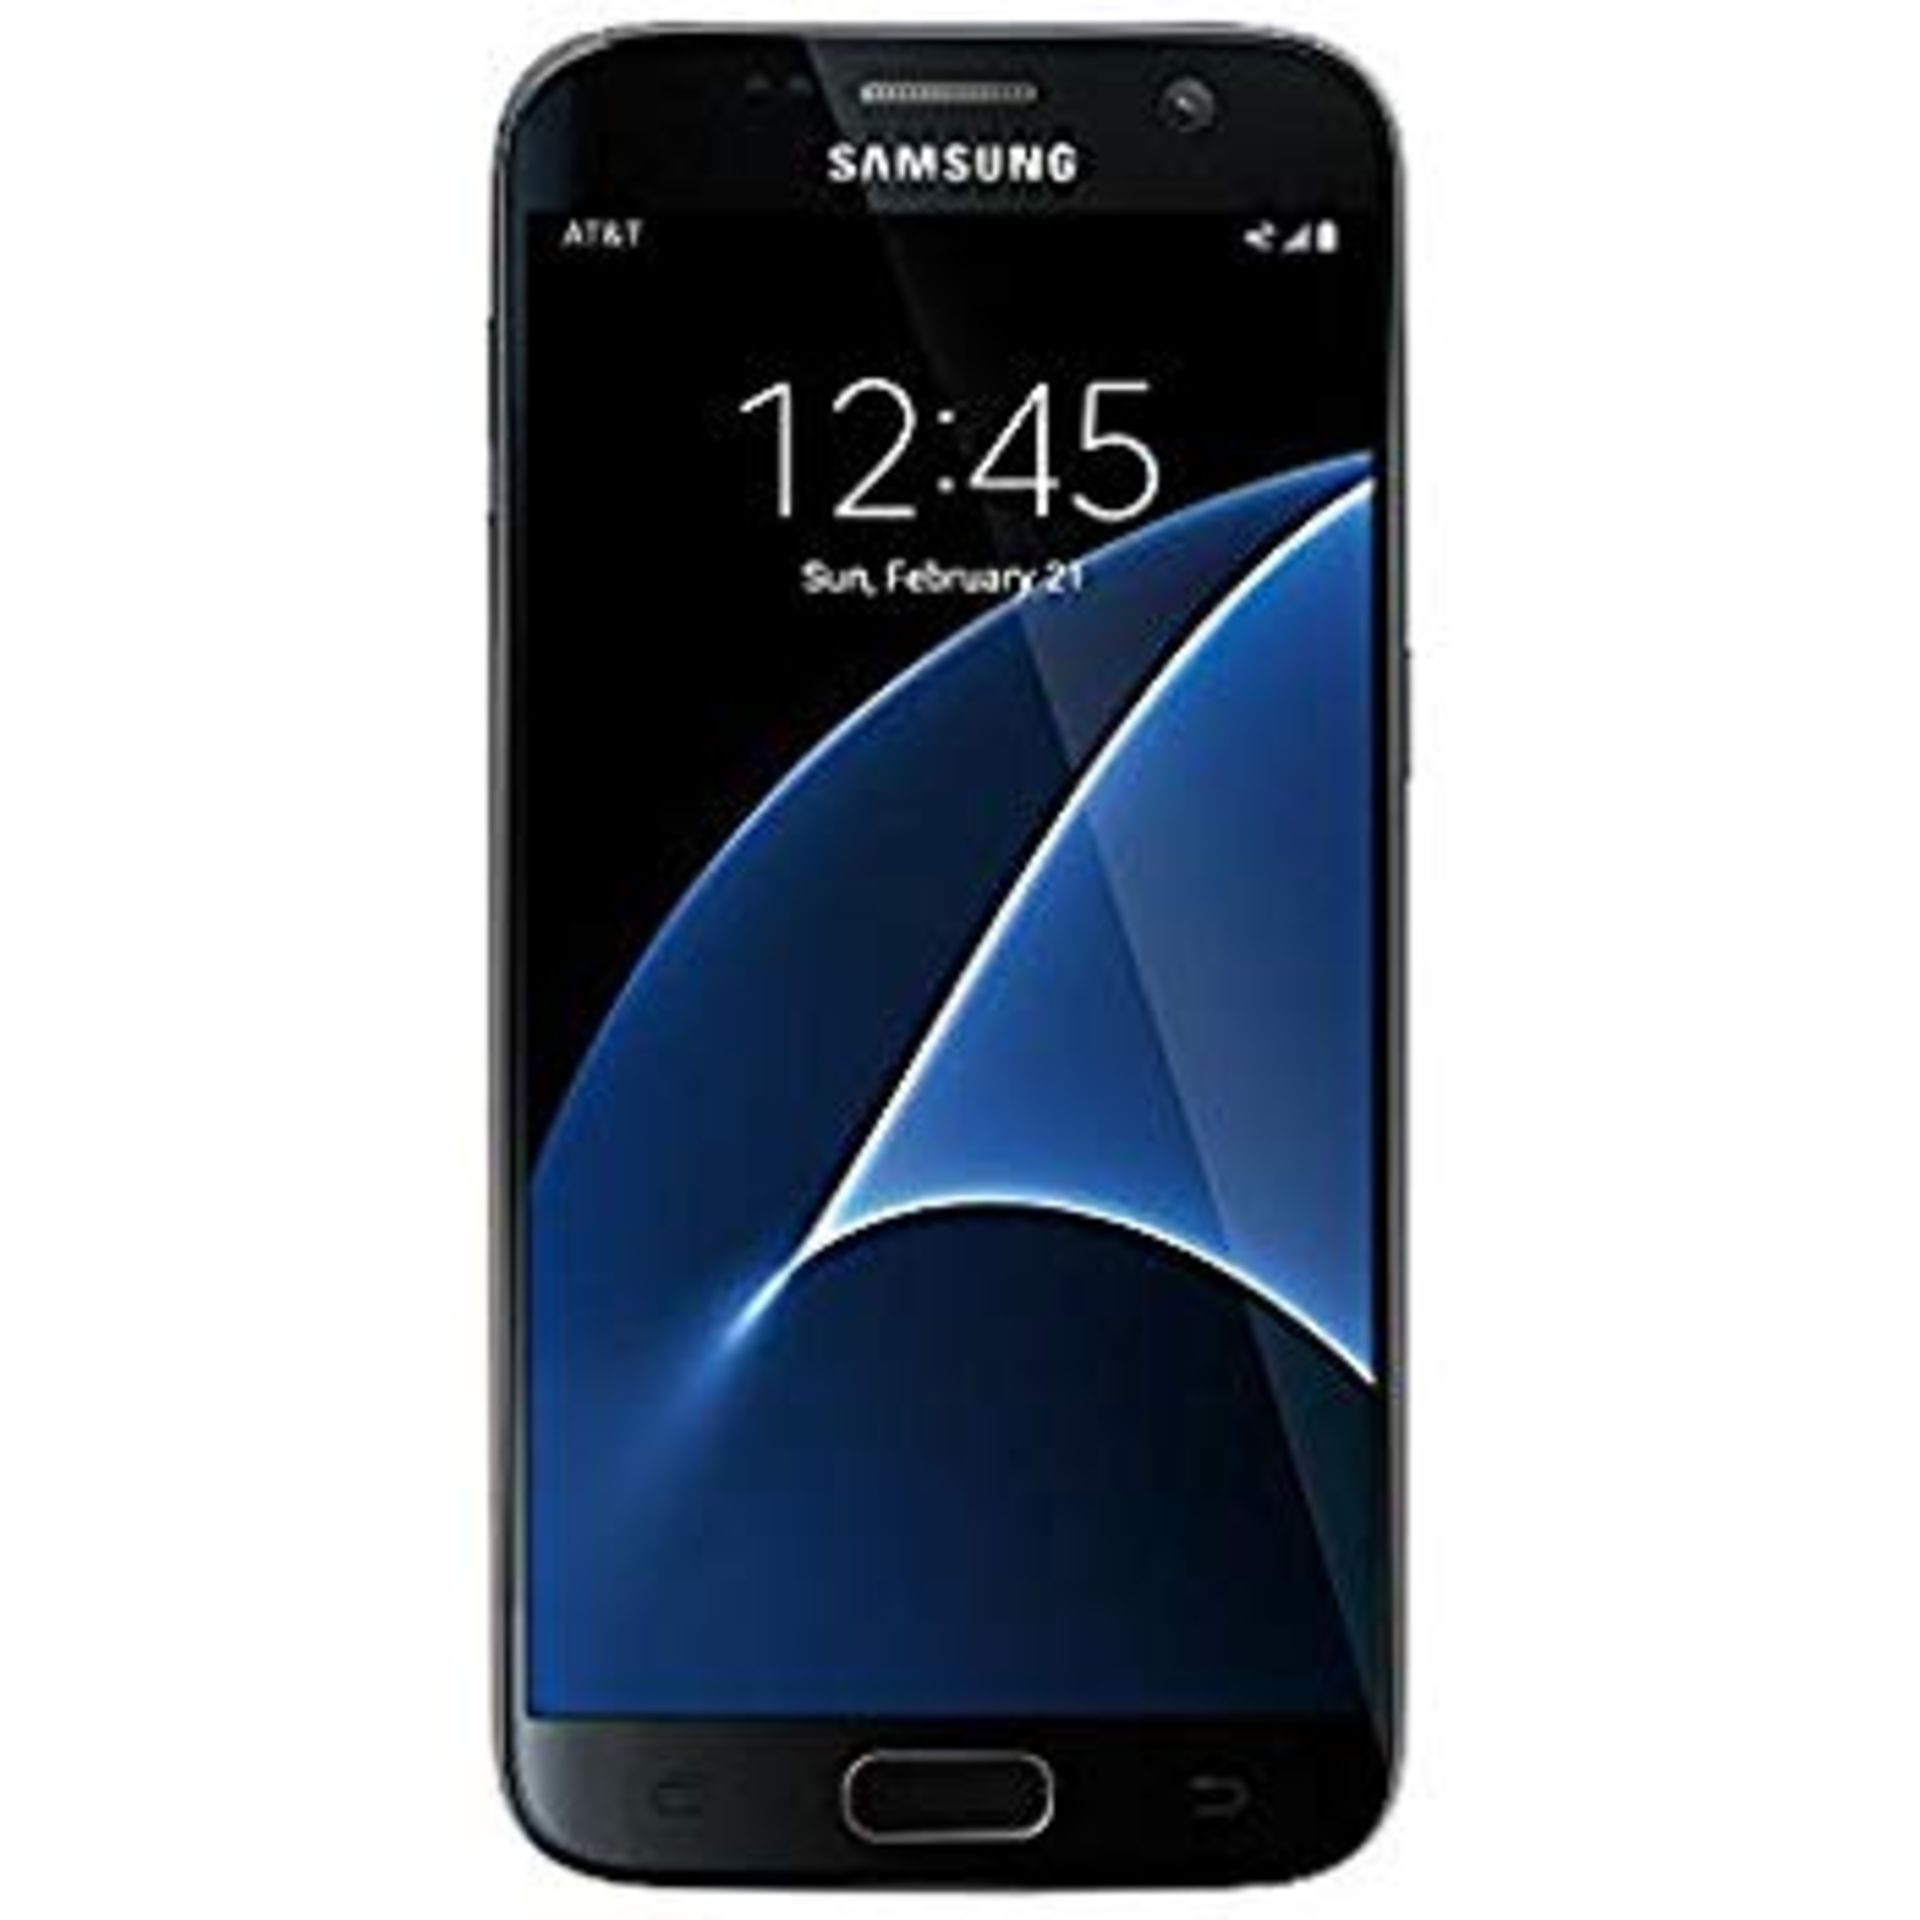 No VAT Grade A Samsung S7 ( G930A/T/V/P ) Colours May Vary - Item Available After Approx 15 Working